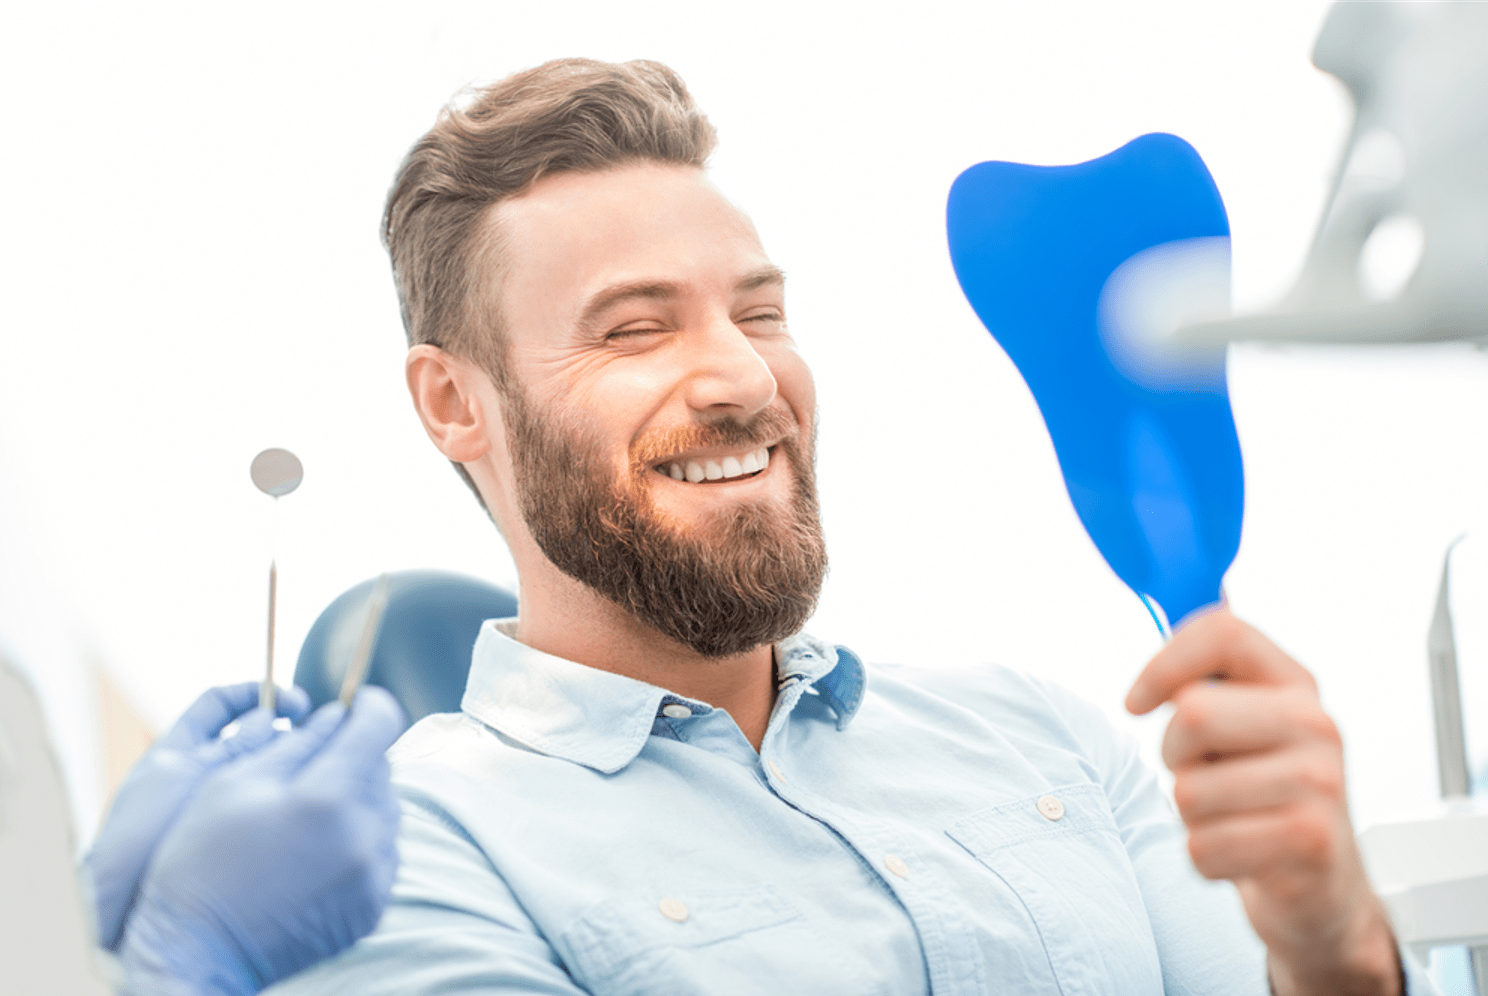 When Do You Need a Dental Crown?